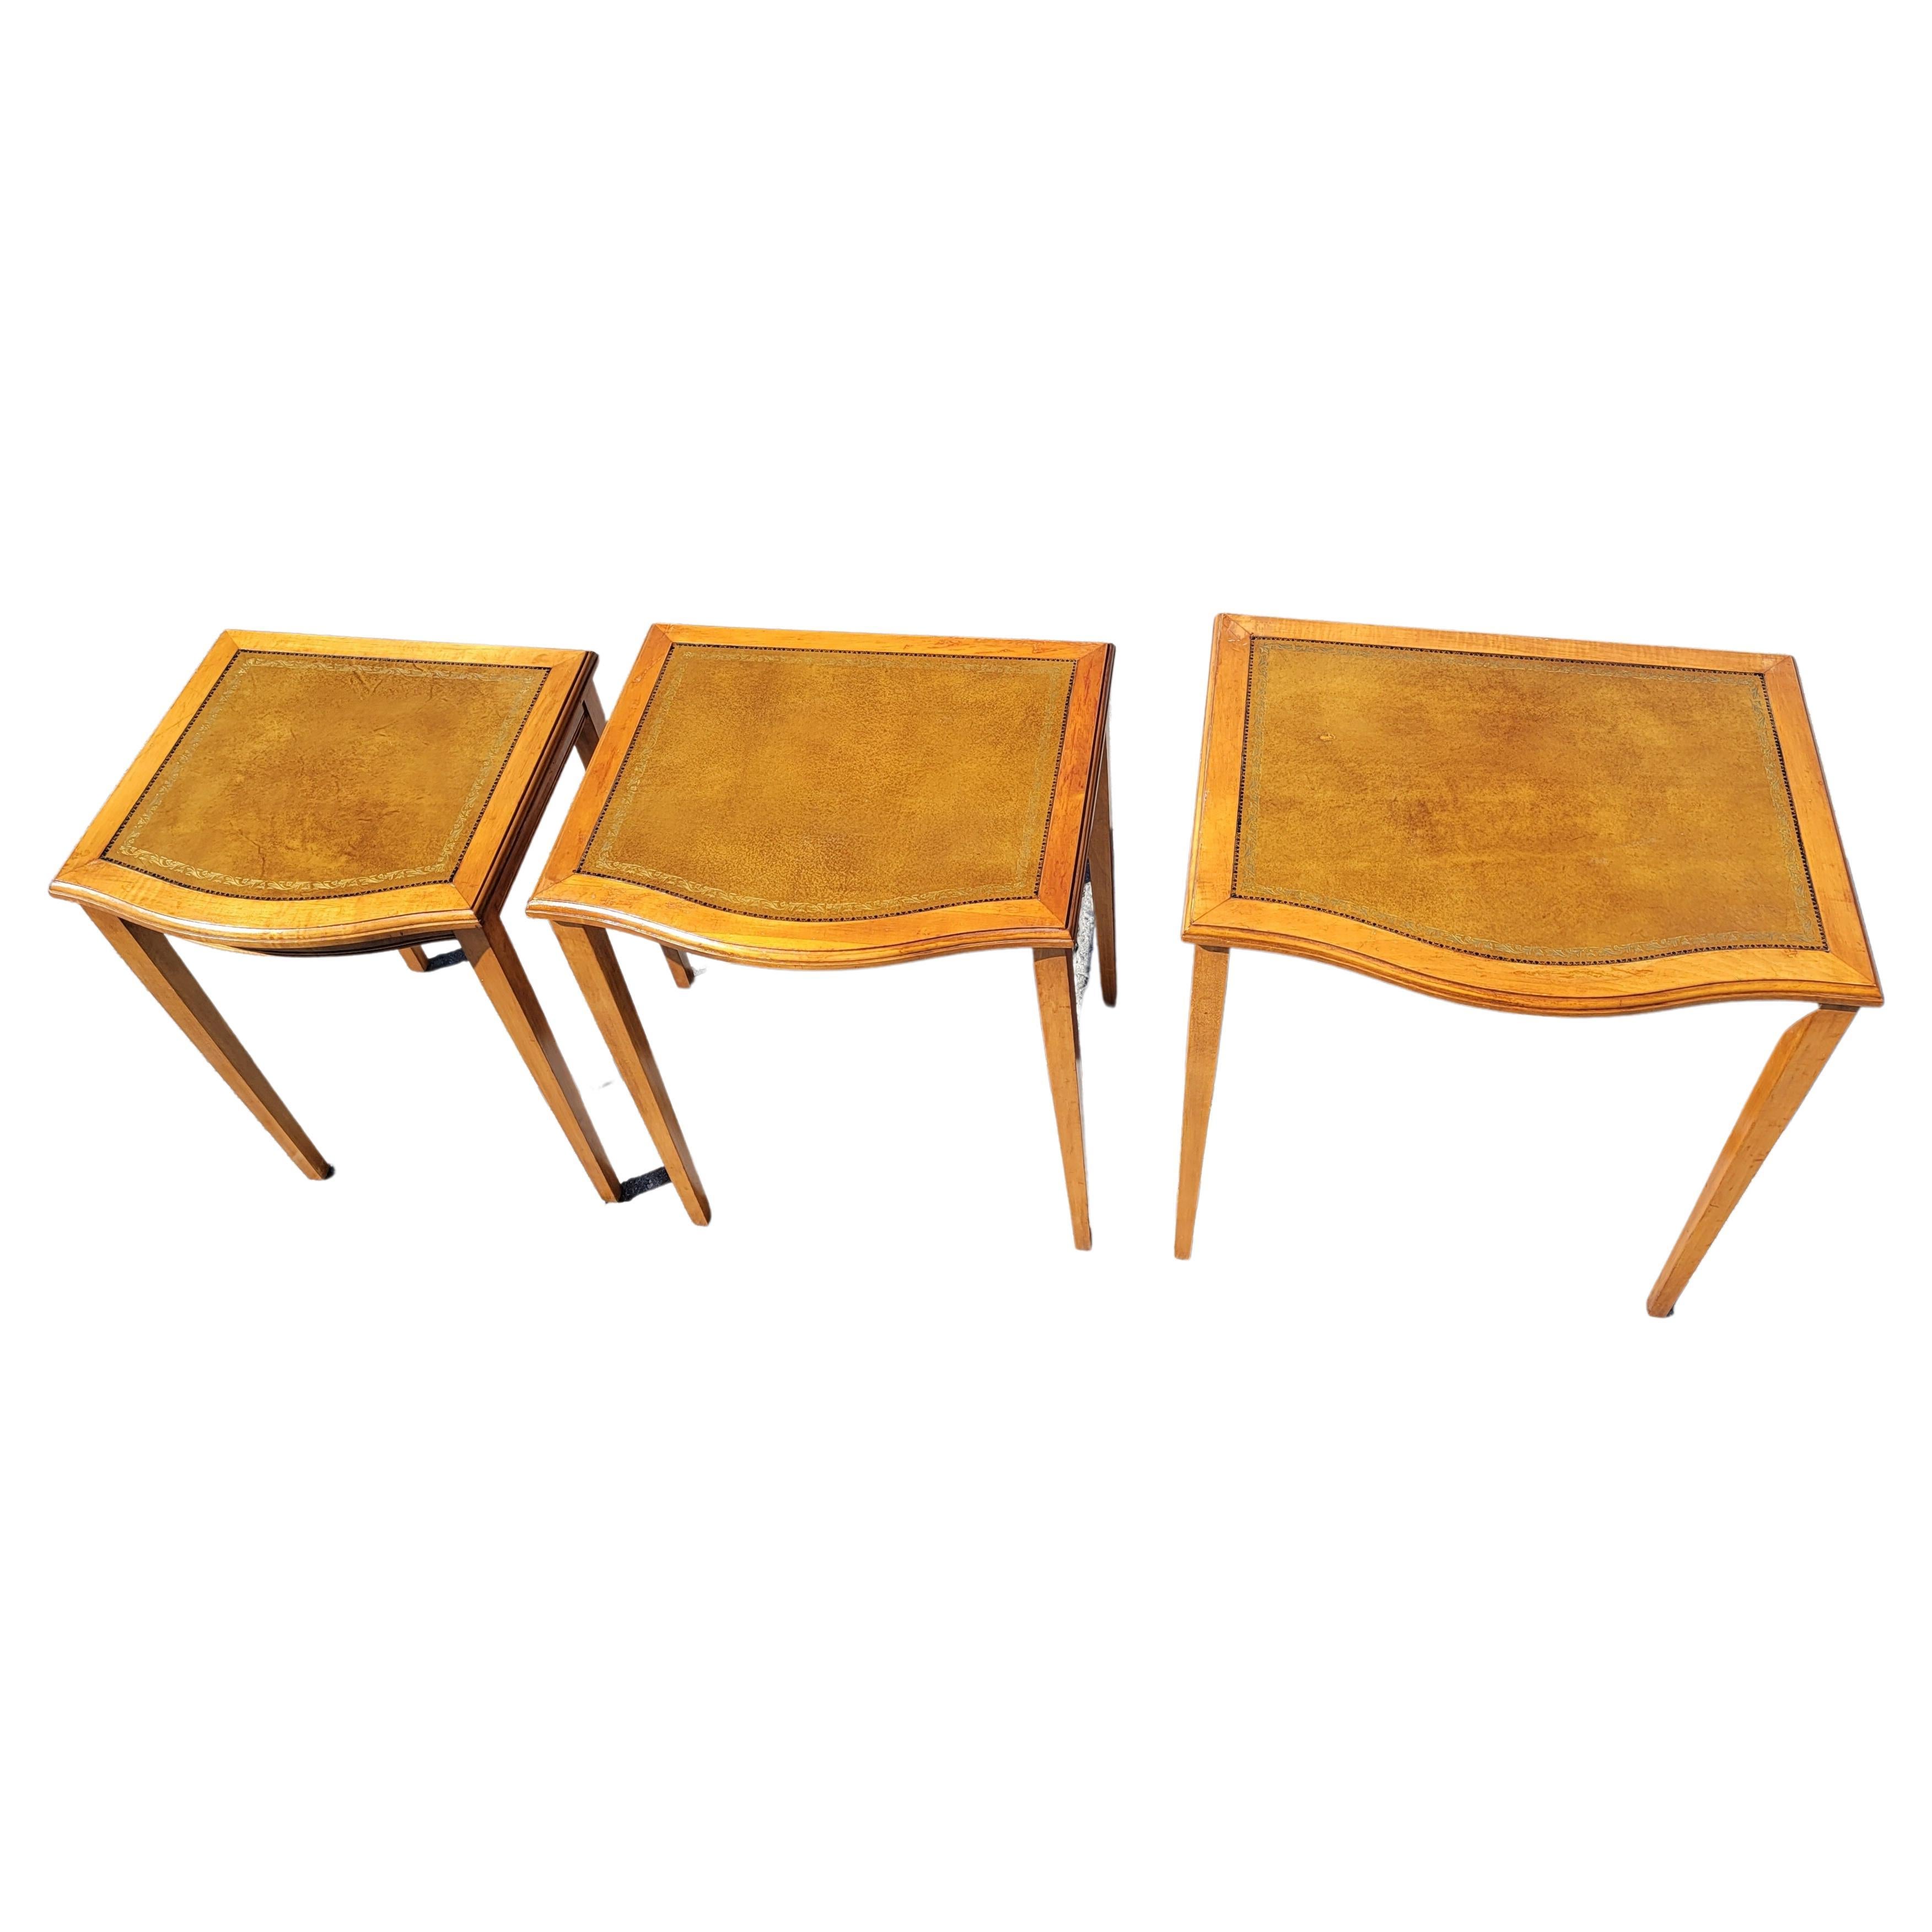 20th Century Mid-Century Modern Fruitwood Stenciled Leather Top Nesting Tables, Set of 3 For Sale